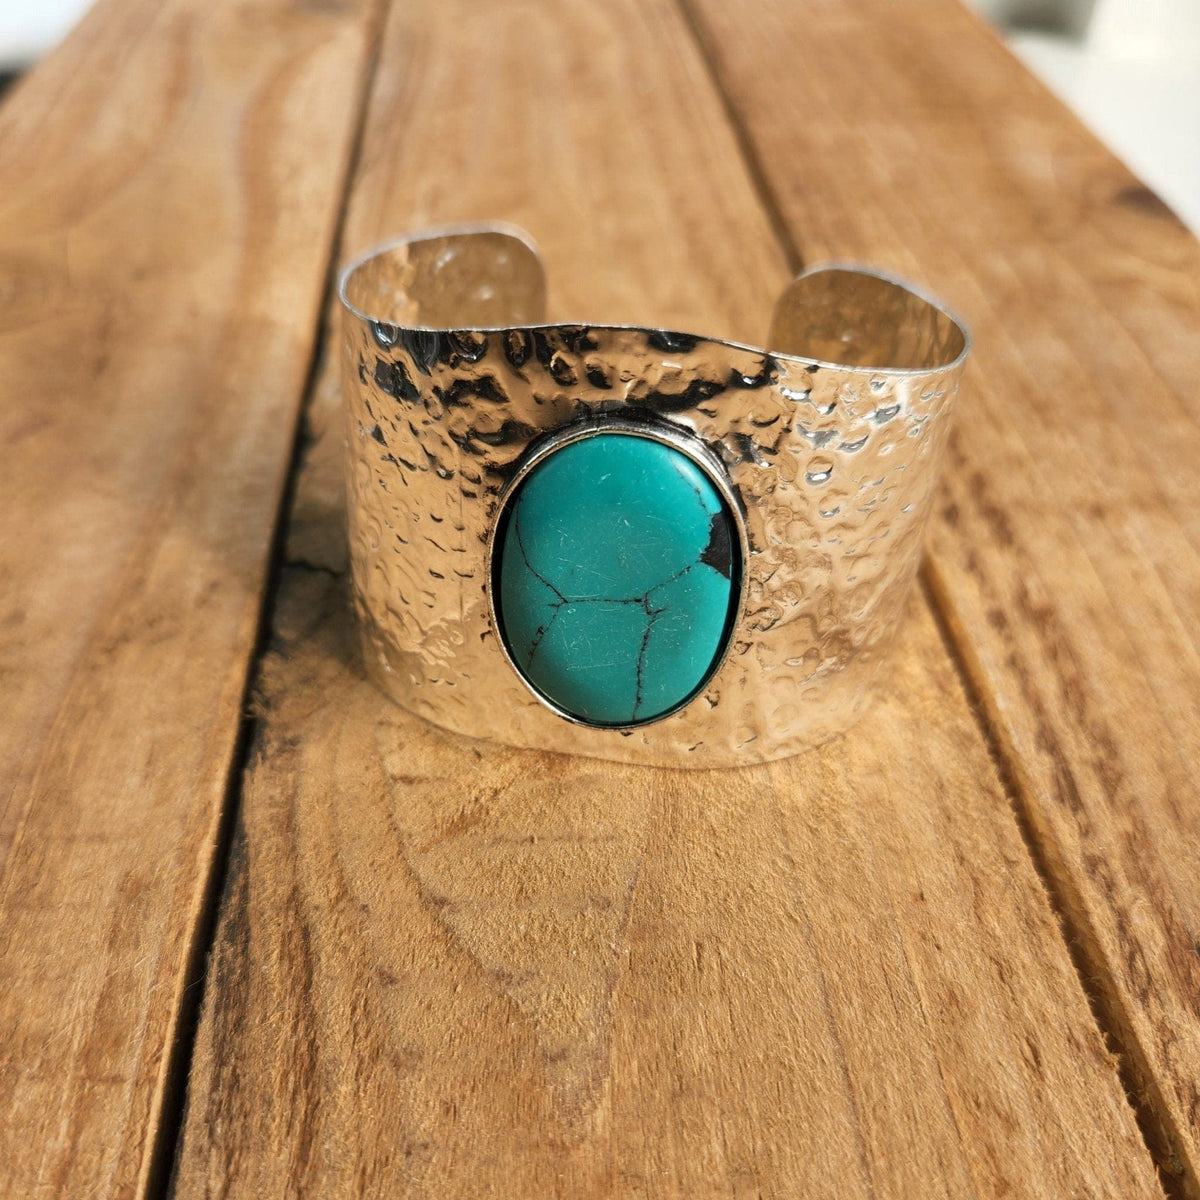 Large Silver Cuff Bracelet with Turquoise Stone Western Bracelet TheFringeCultureCollective